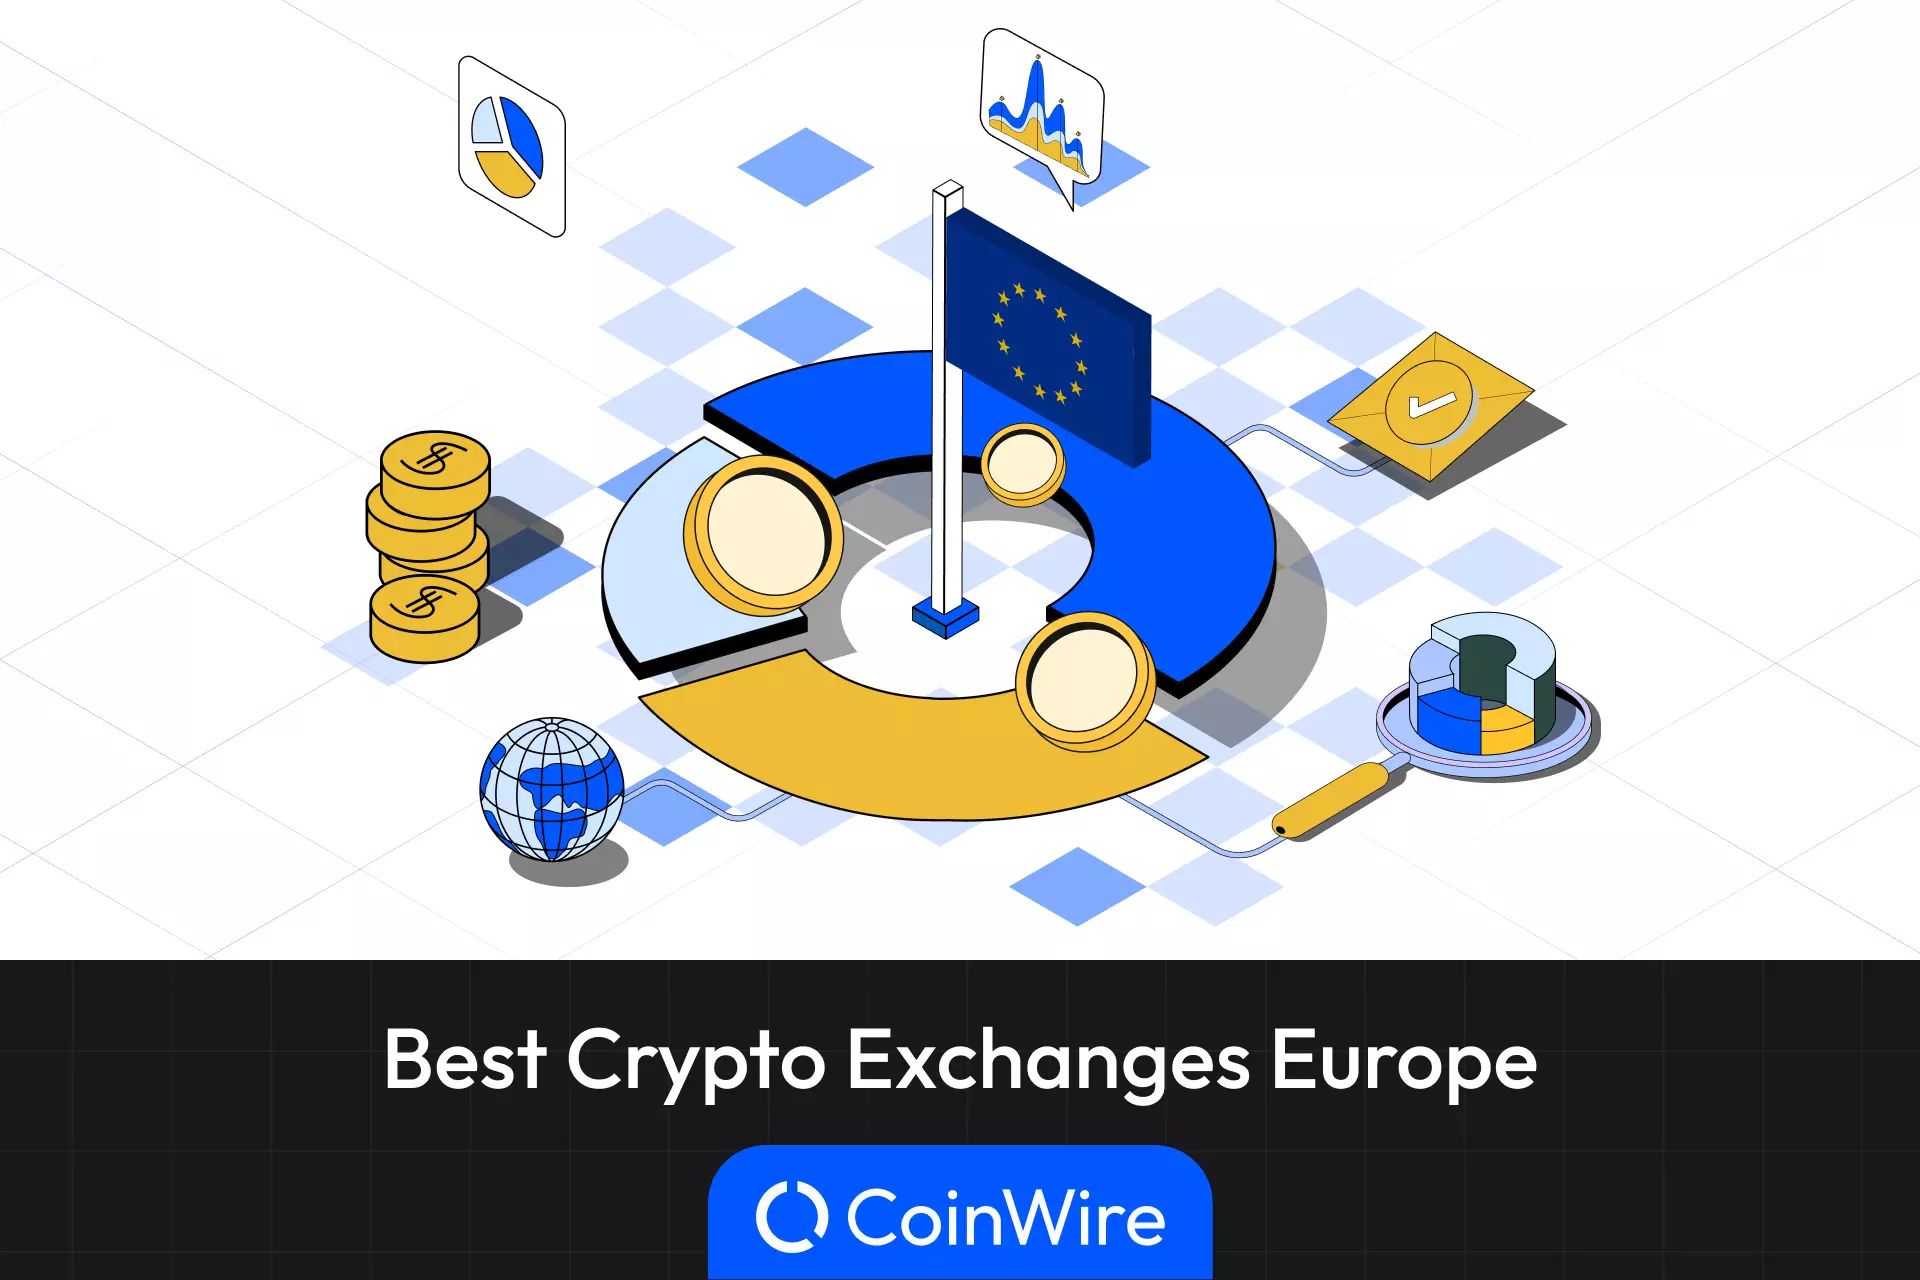 Best Crypto Exchange Reviews - Find Top Crypto Exchanges